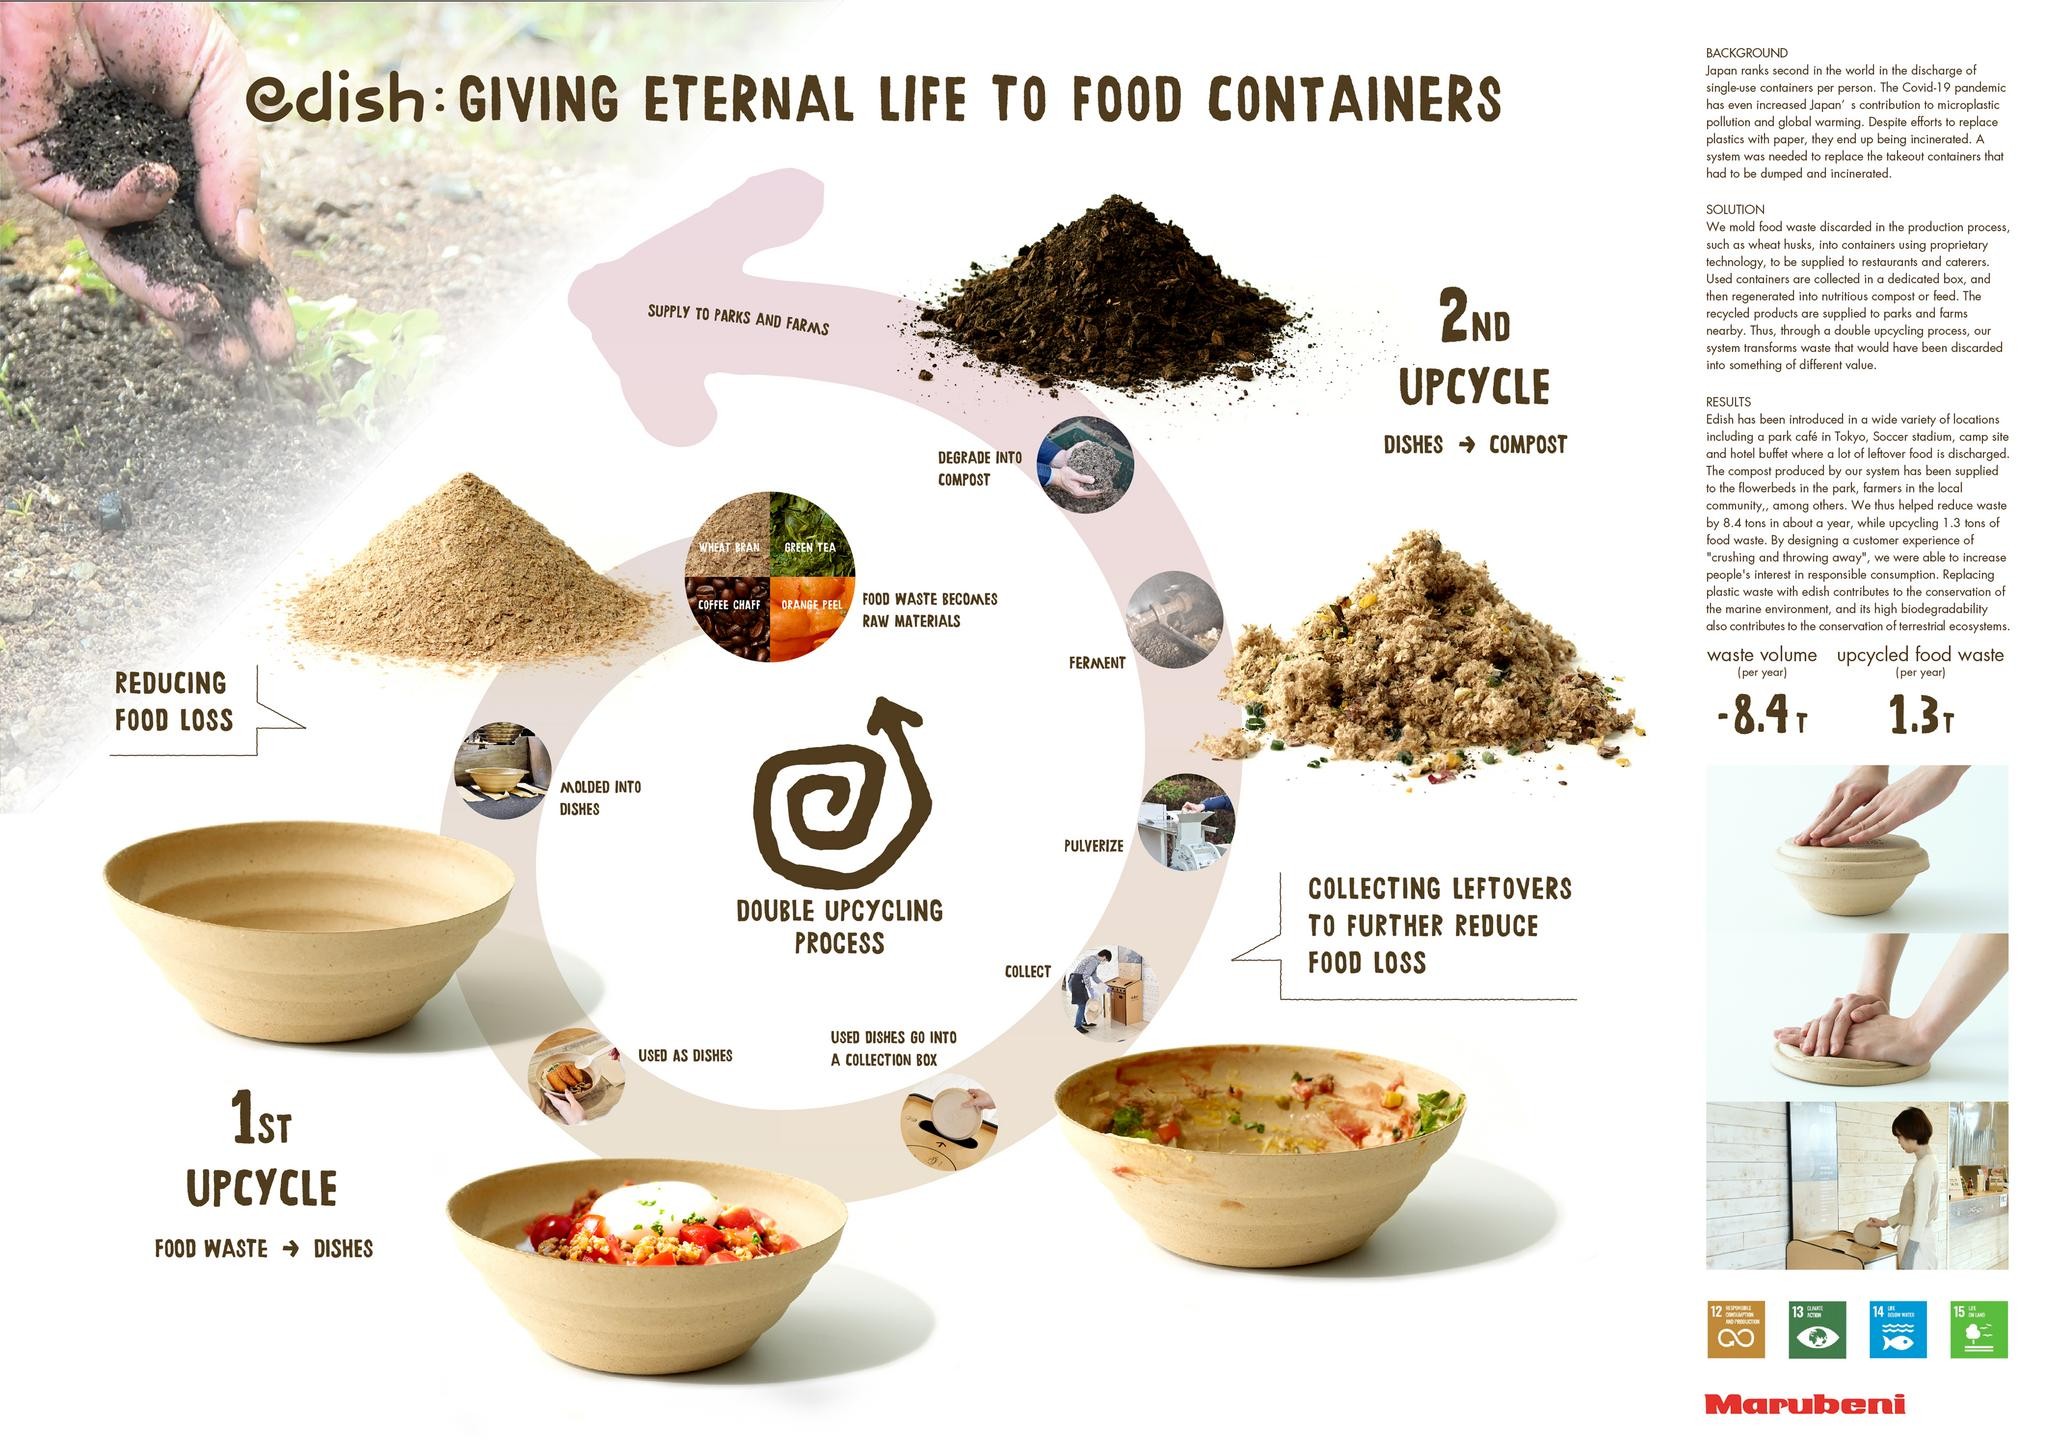 edish: Giving Eternal Life to Food Containers